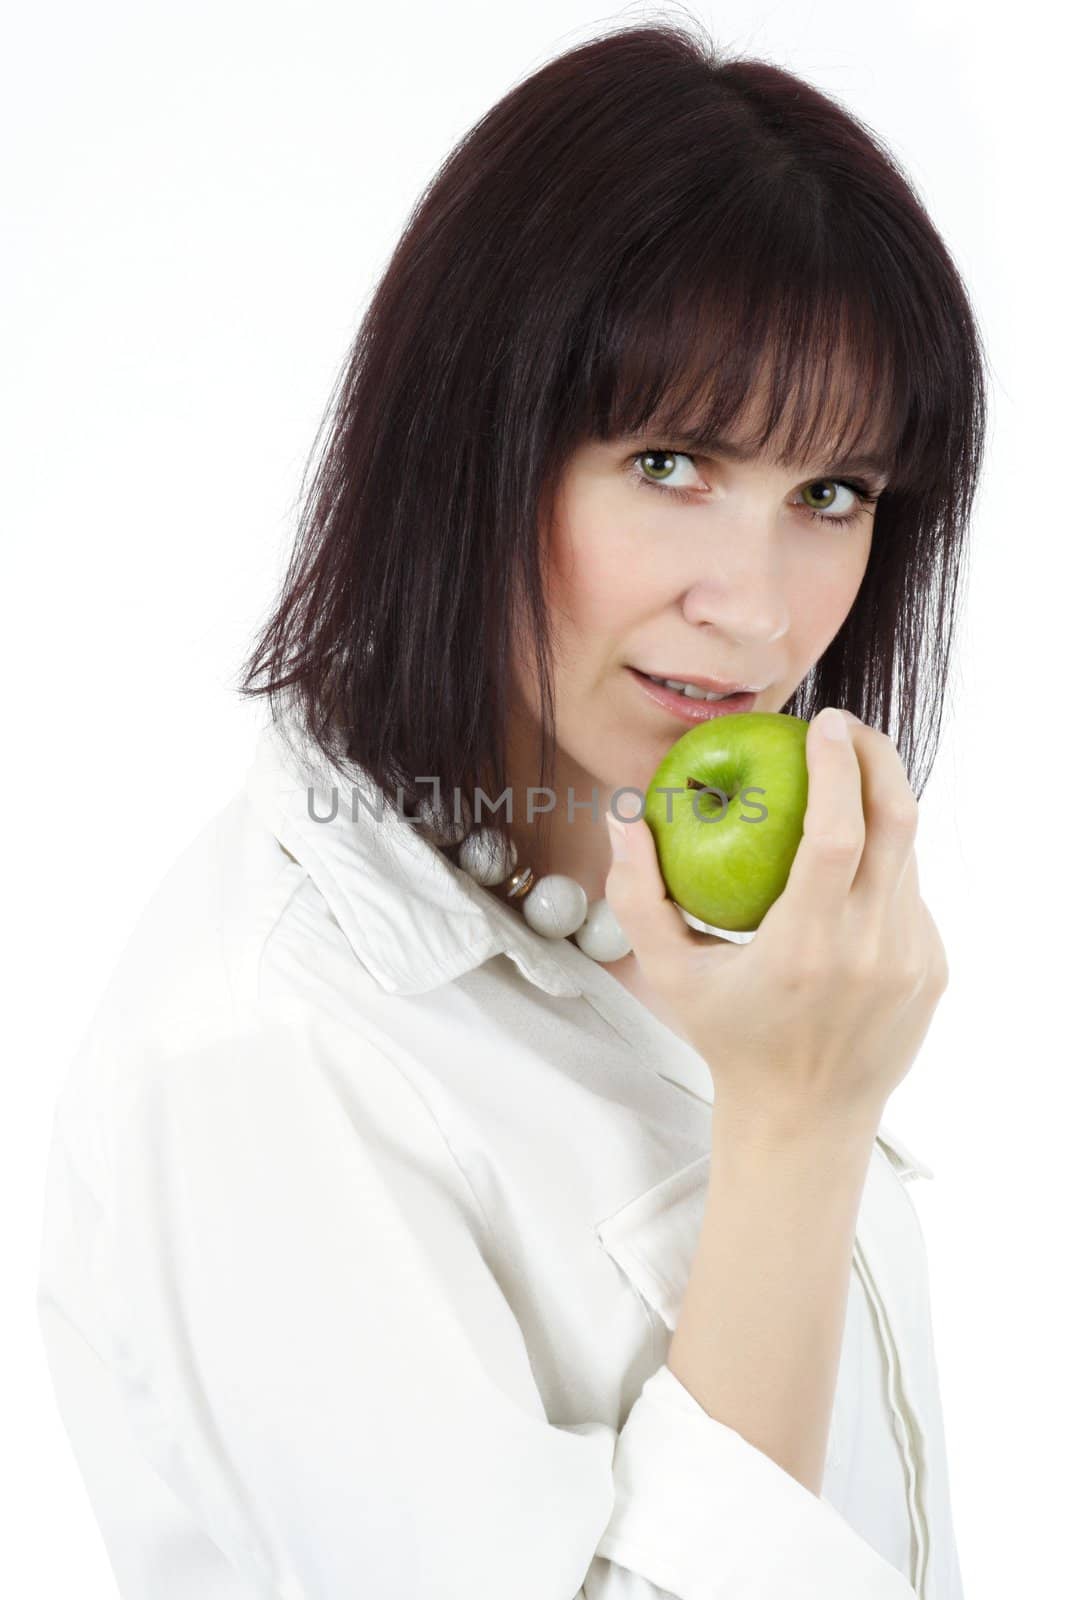 woman with green apple by lanalanglois